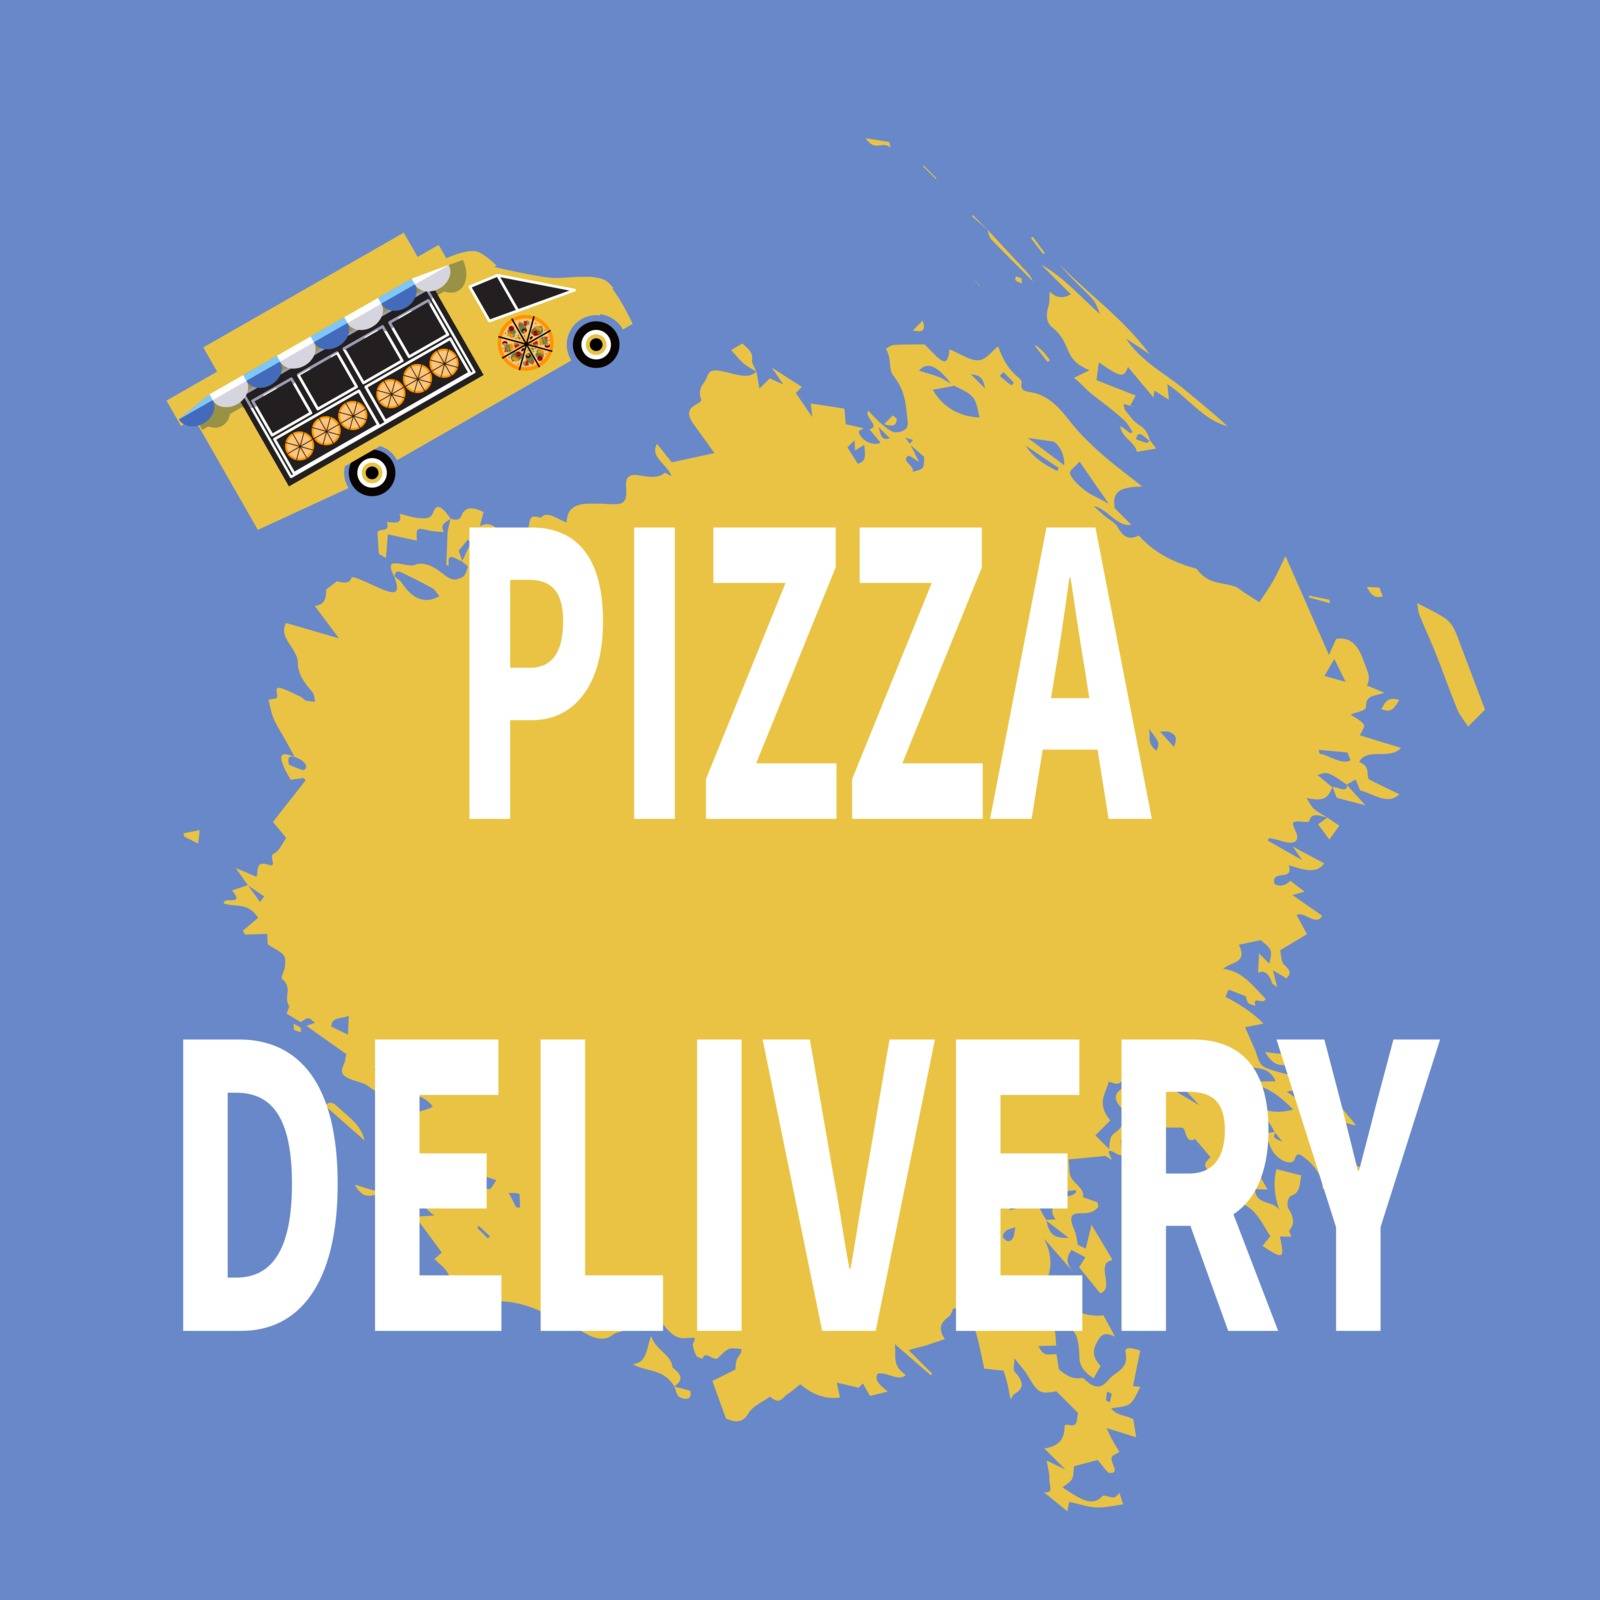 Vector delivery service image of food and pizza by Infobond